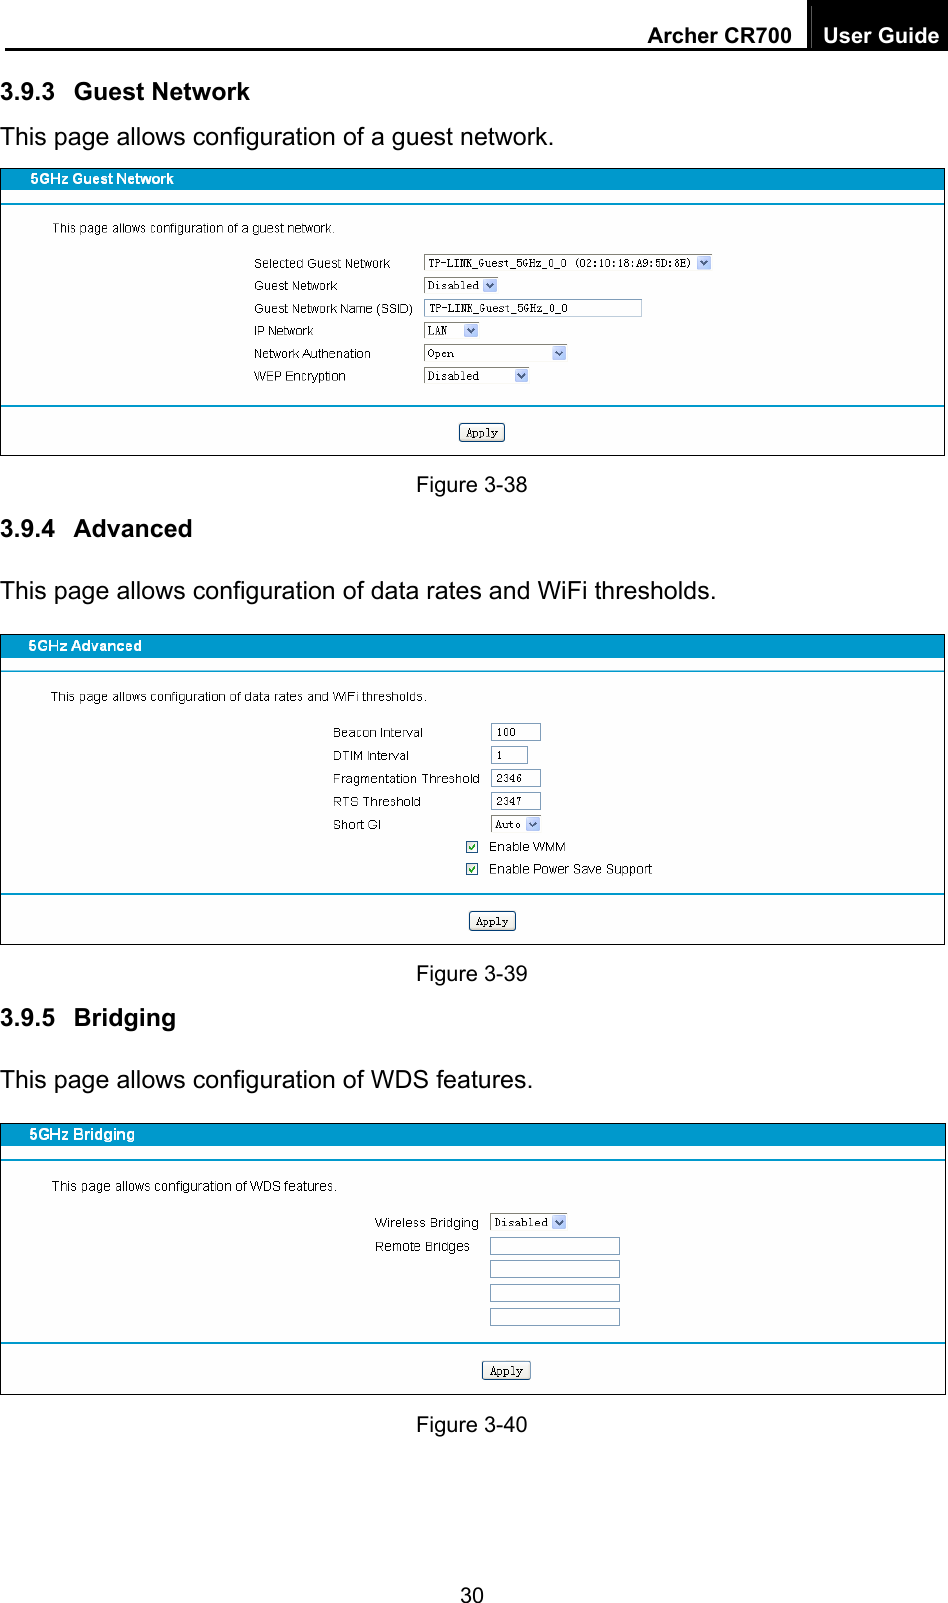 Archer CR700  User Guide 30 3.9.3  Guest Network This page allows configuration of a guest network.  Figure 3-38 3.9.4  Advanced This page allows configuration of data rates and WiFi thresholds.  Figure 3-39 3.9.5  Bridging This page allows configuration of WDS features.  Figure 3-40 